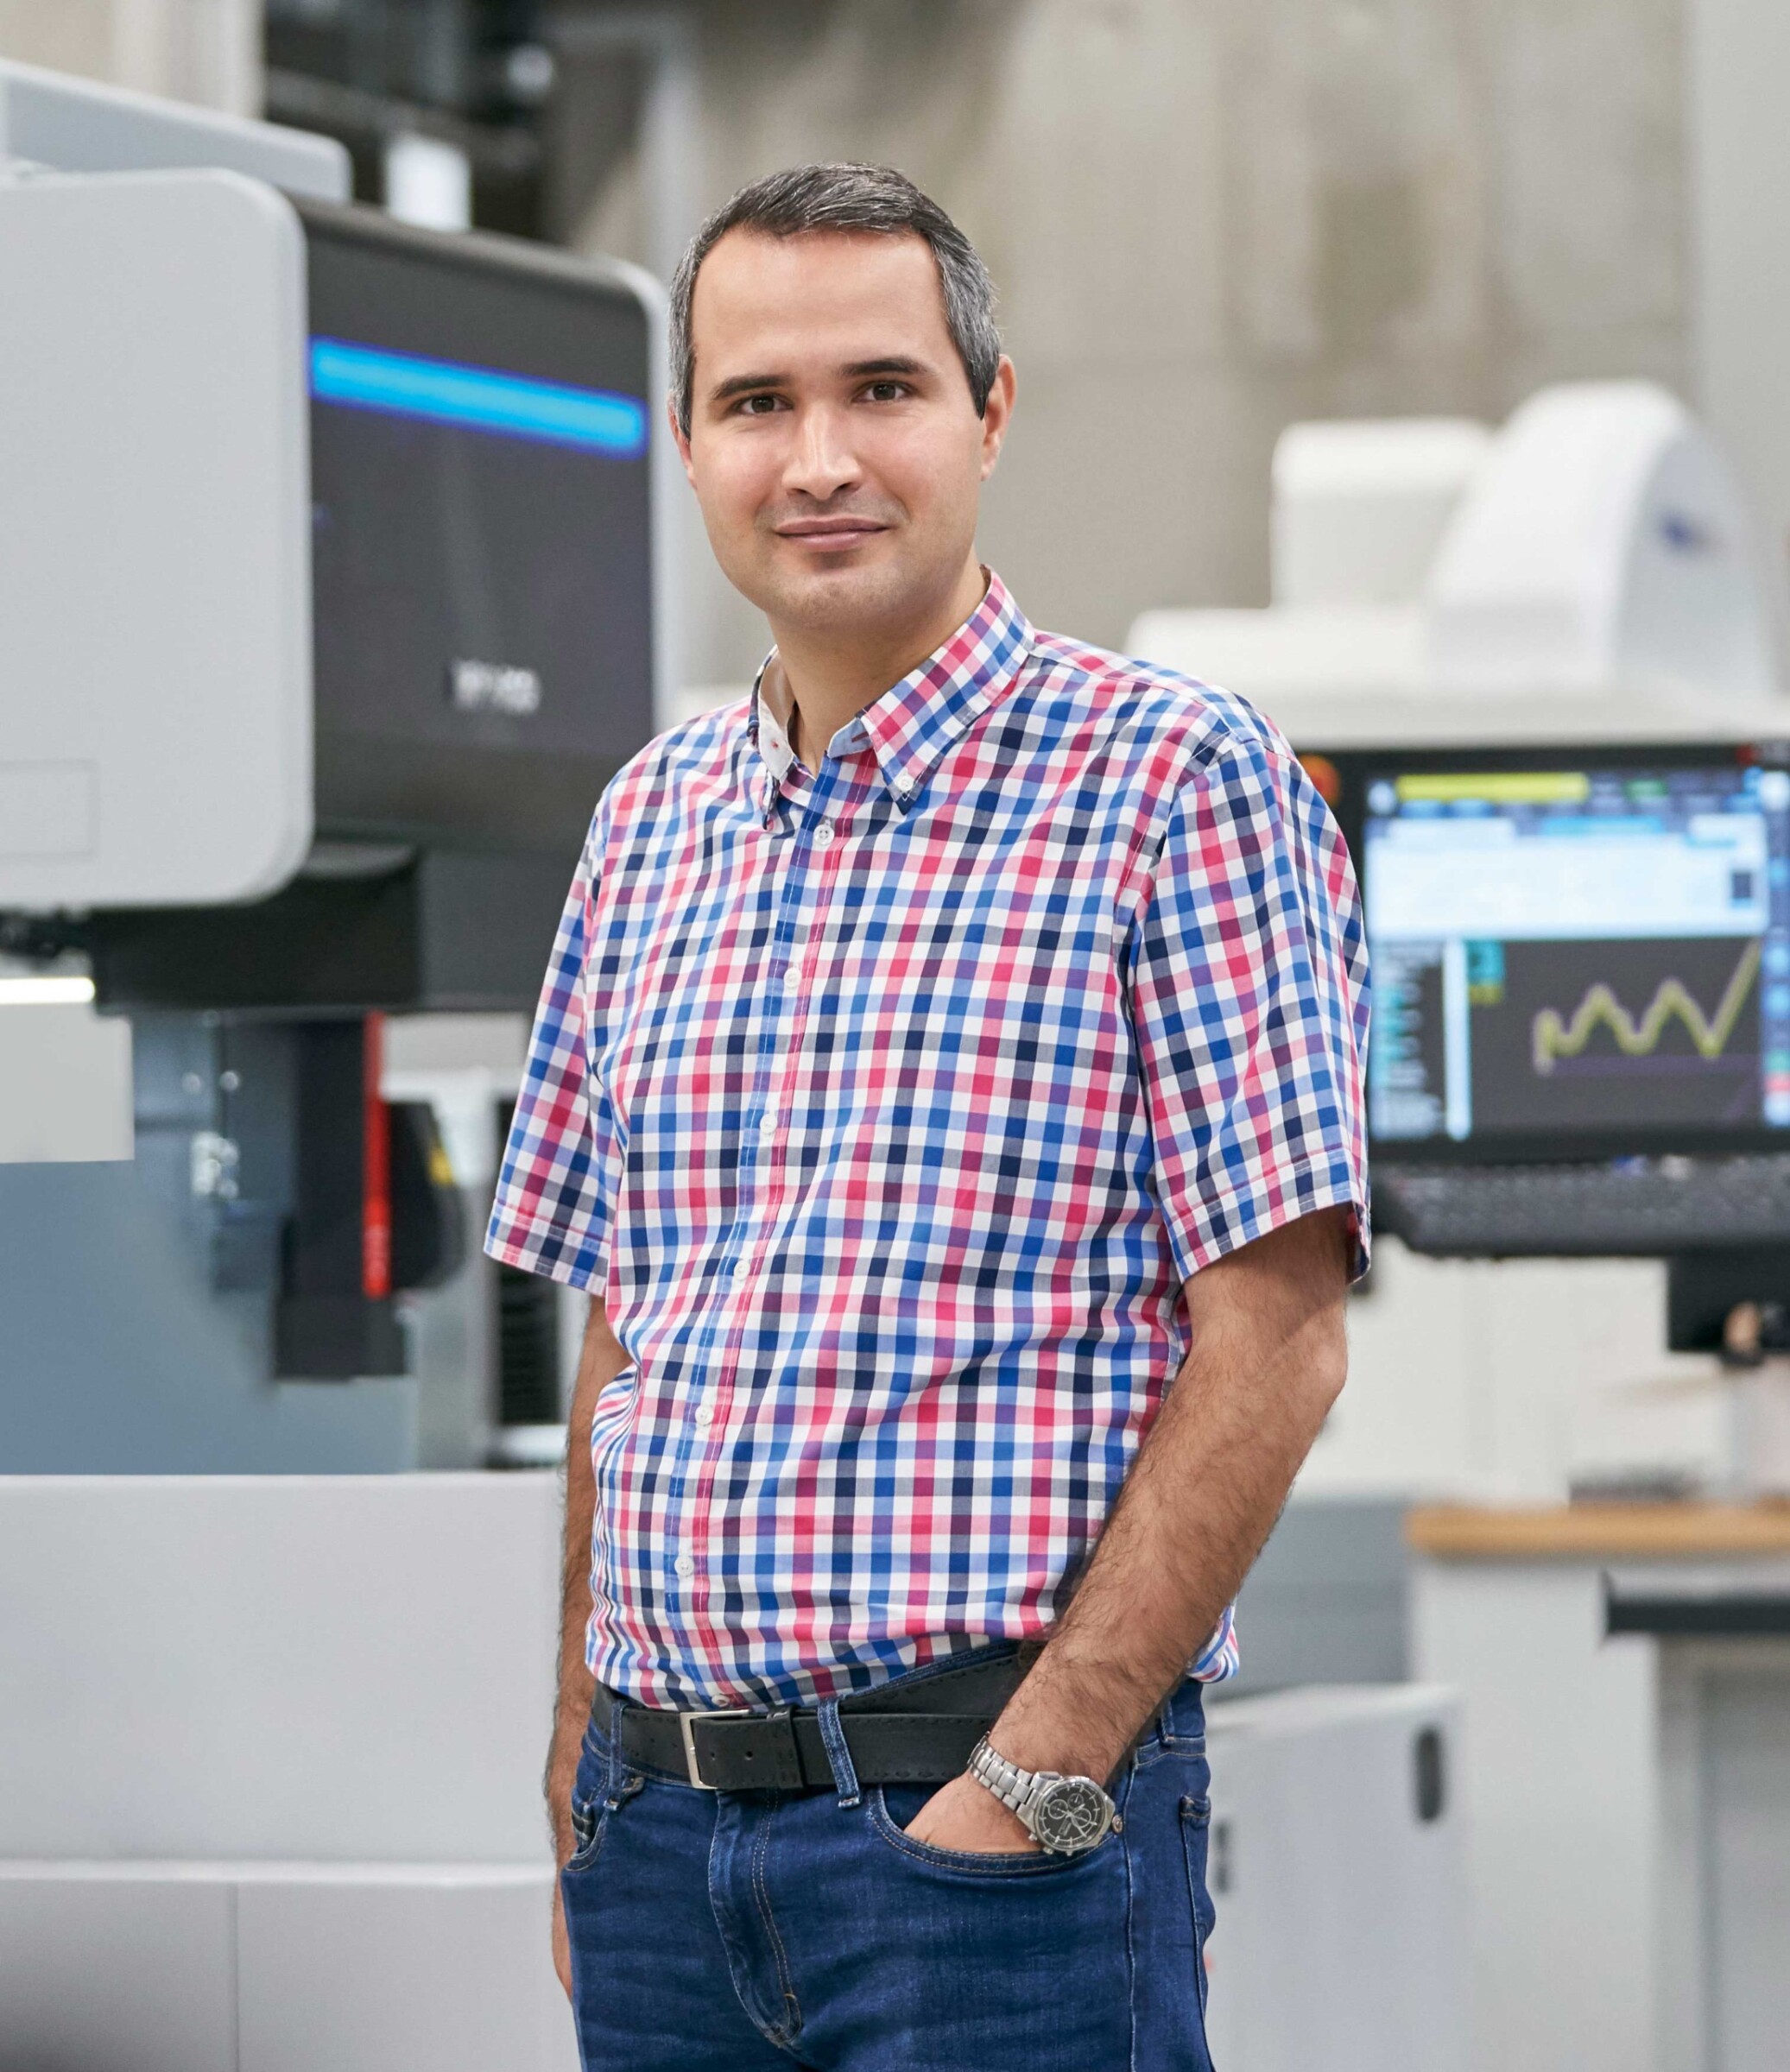 Prof. Dr.-Ing. Bahman Azarhoushang, Head of the Institute for Precision Machining